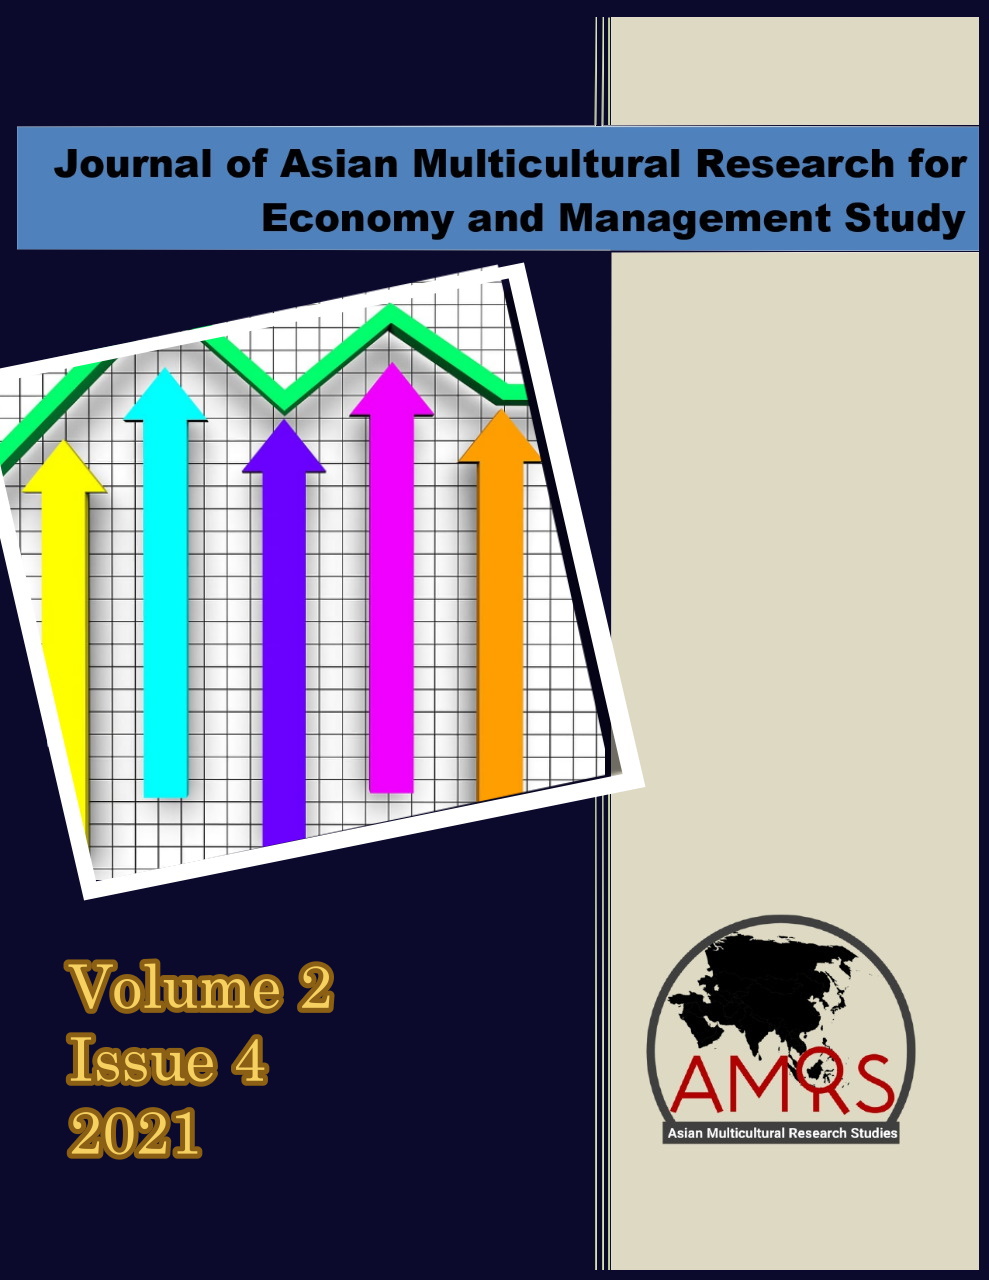 					View Vol. 2 No. 4 (2021): Journal of Asian Multicultural Research for Economy and Management Study
				